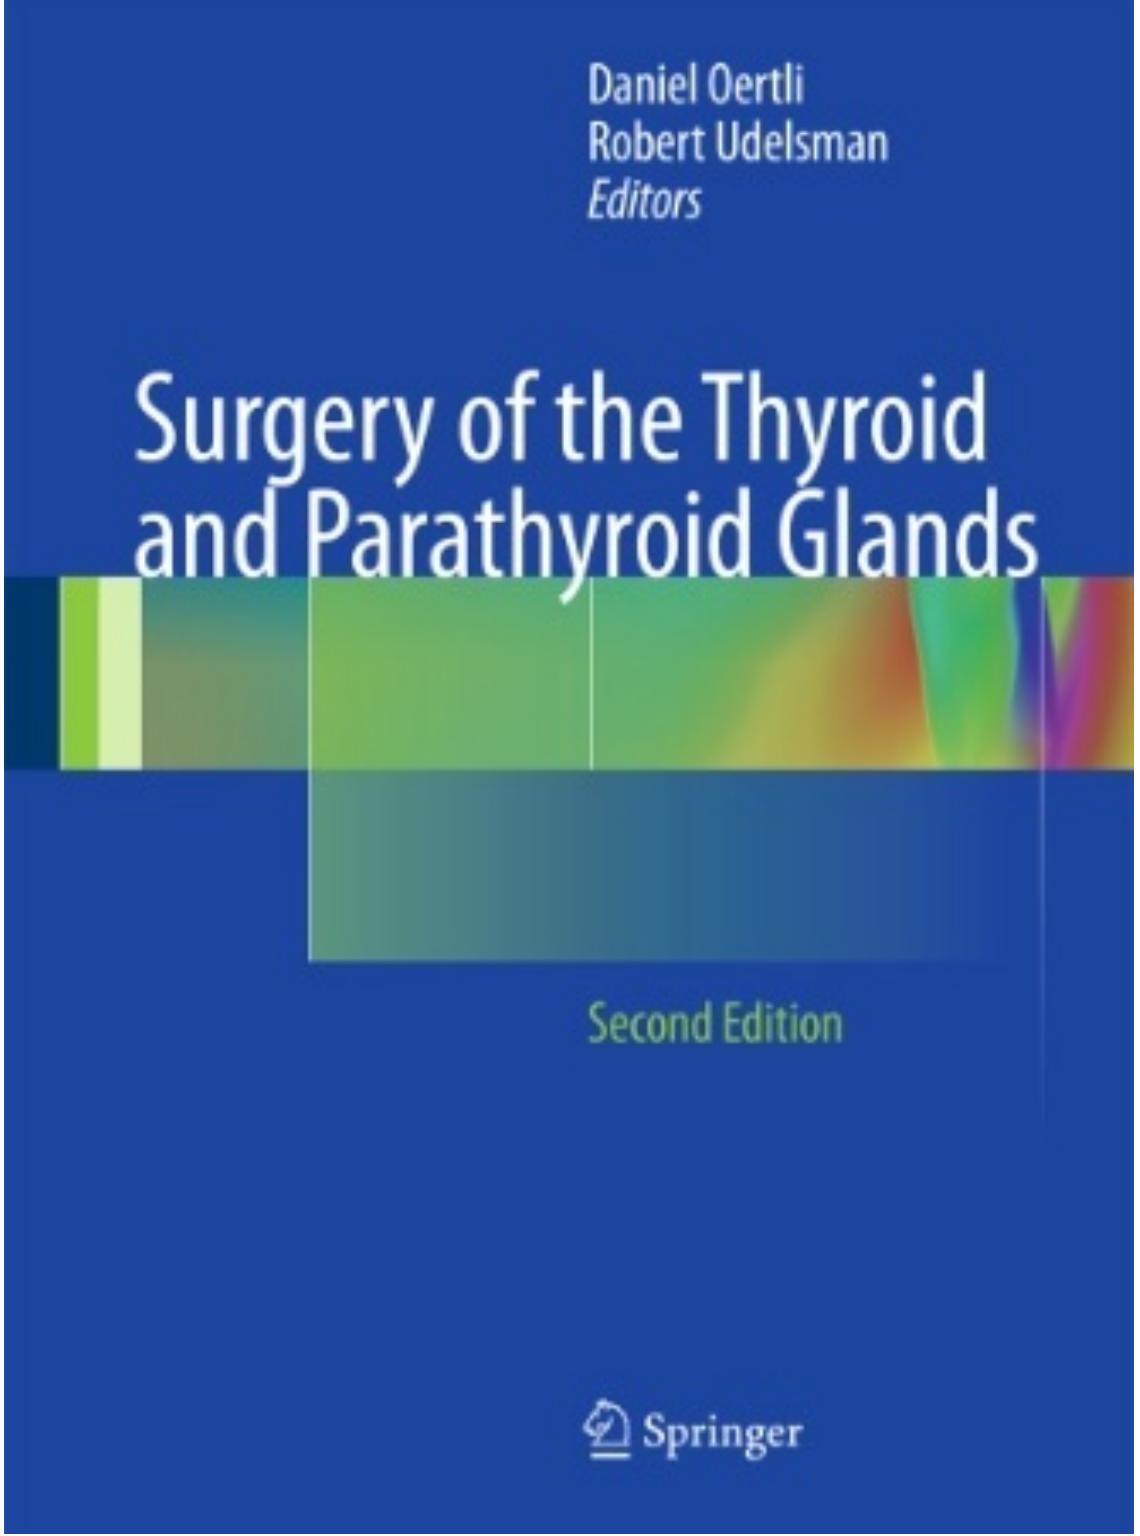 Surgery of the Thyroid and Parathyroid Glands, 2nd Edition by Daniel Oertli and Robert Udelsman - Wei Zhi.jpg